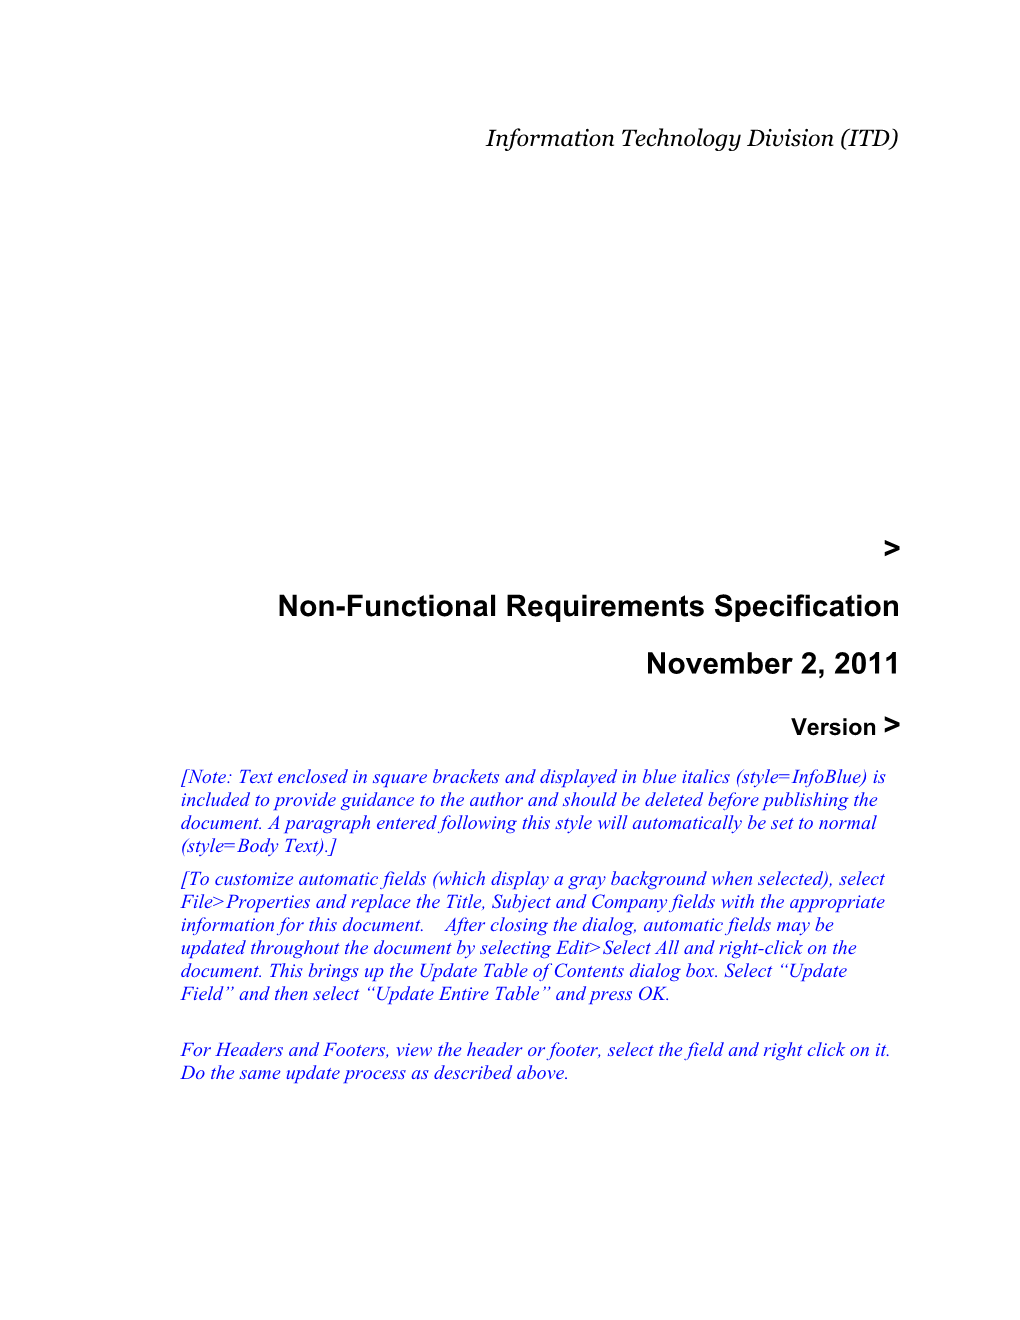 Non-Functional Requirements Specification